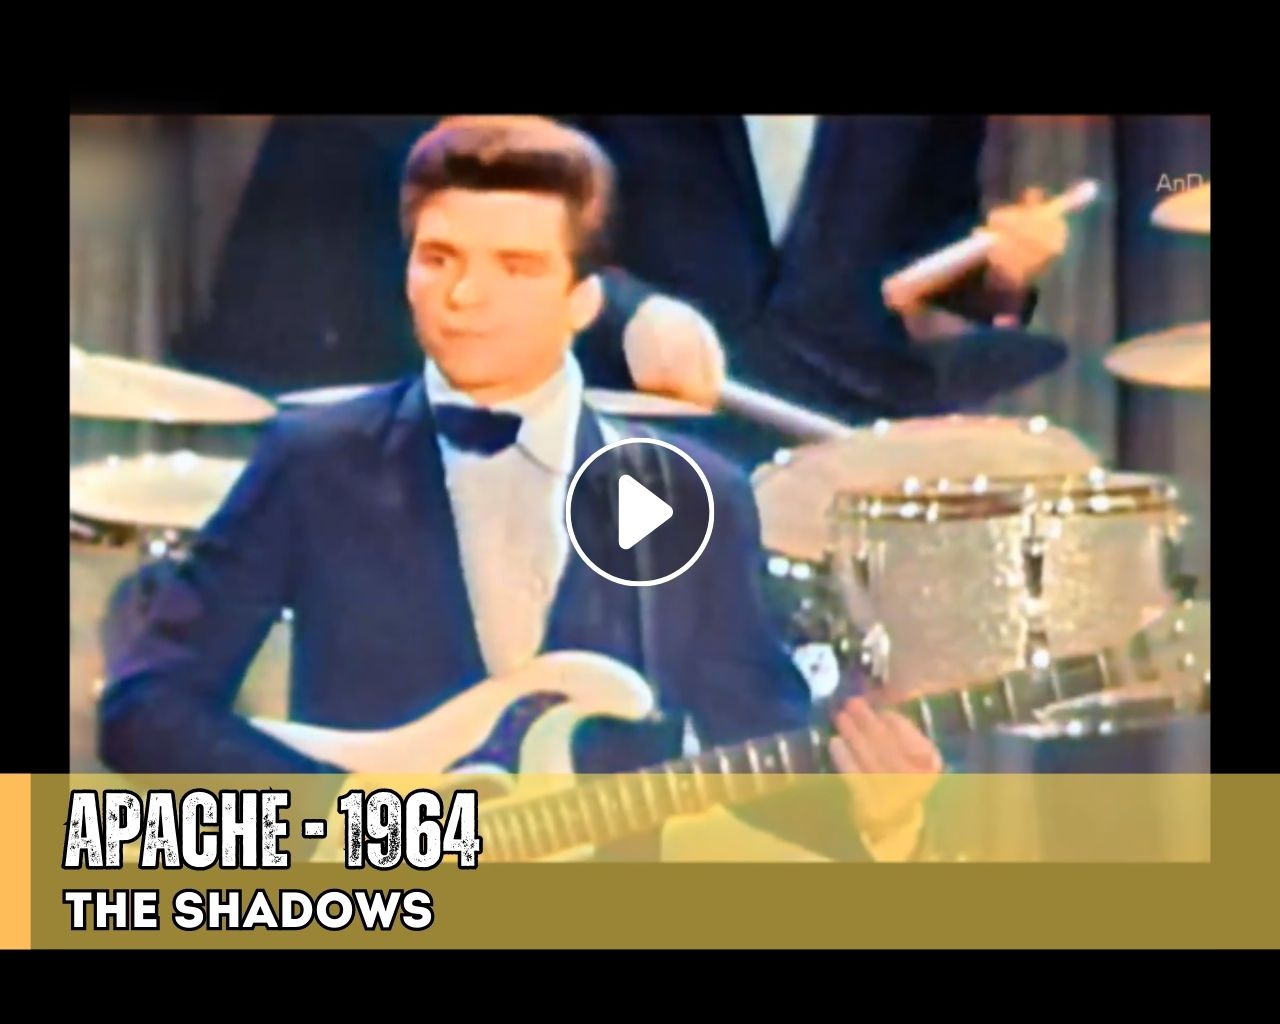 Apache" by The Shadows